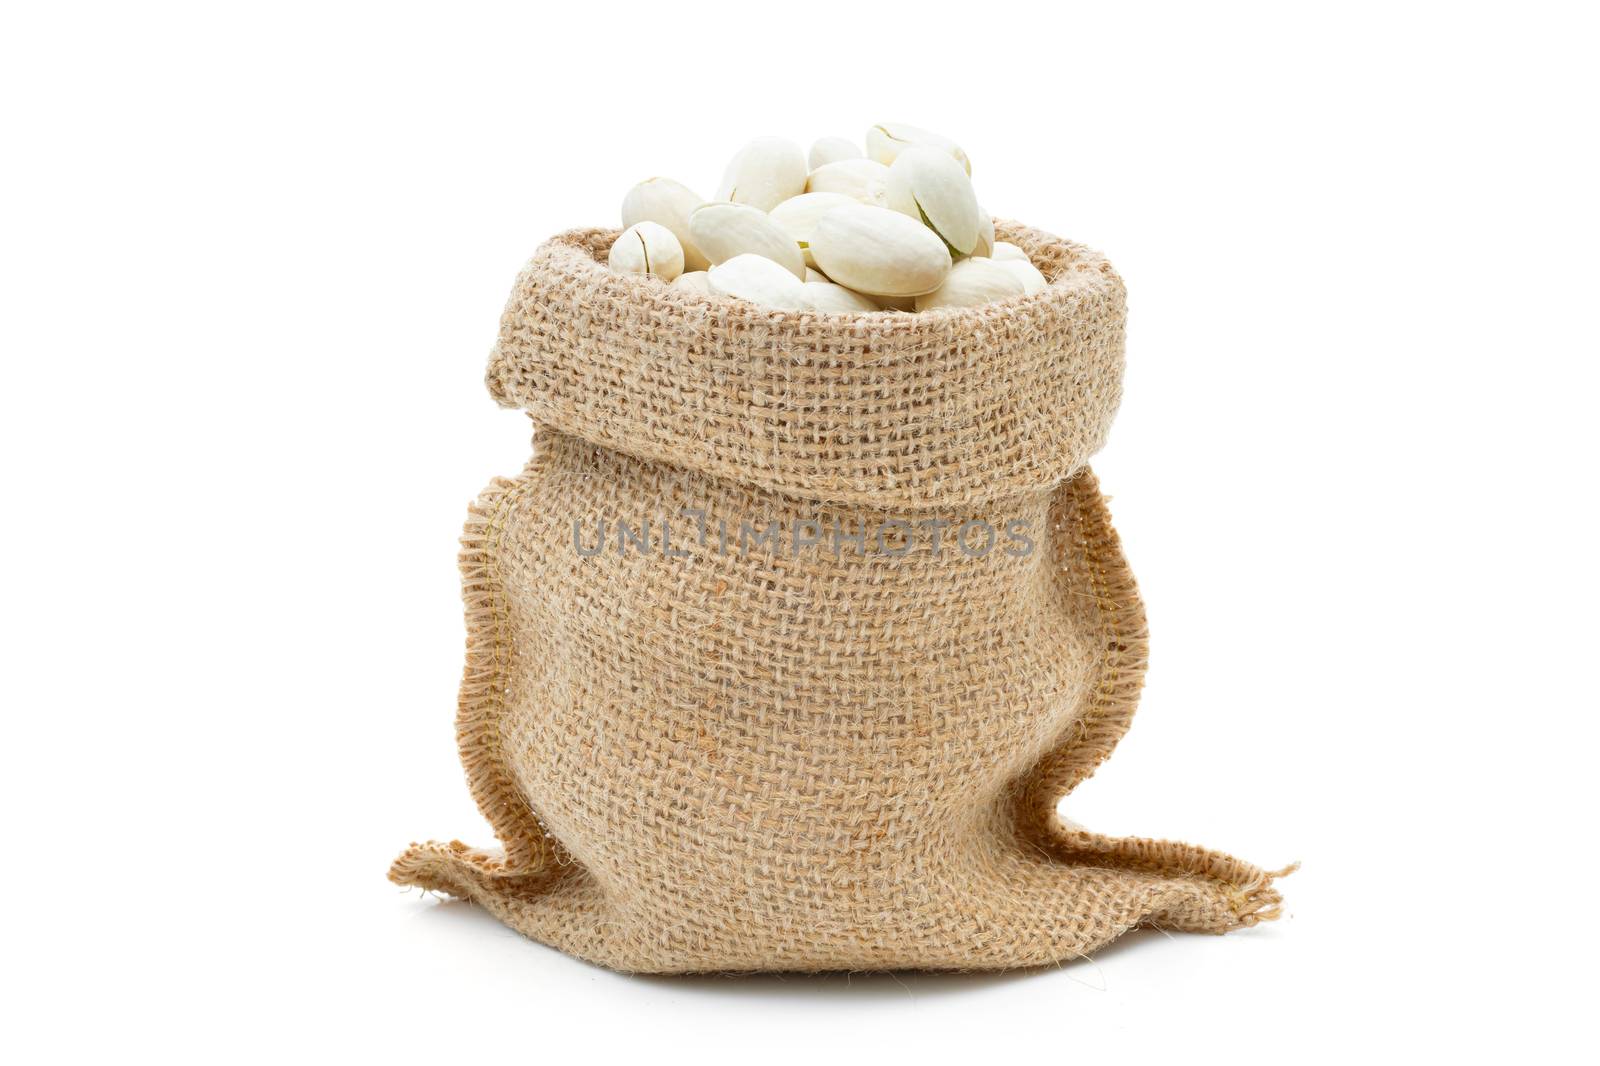 Pistachio in a sack on a white background